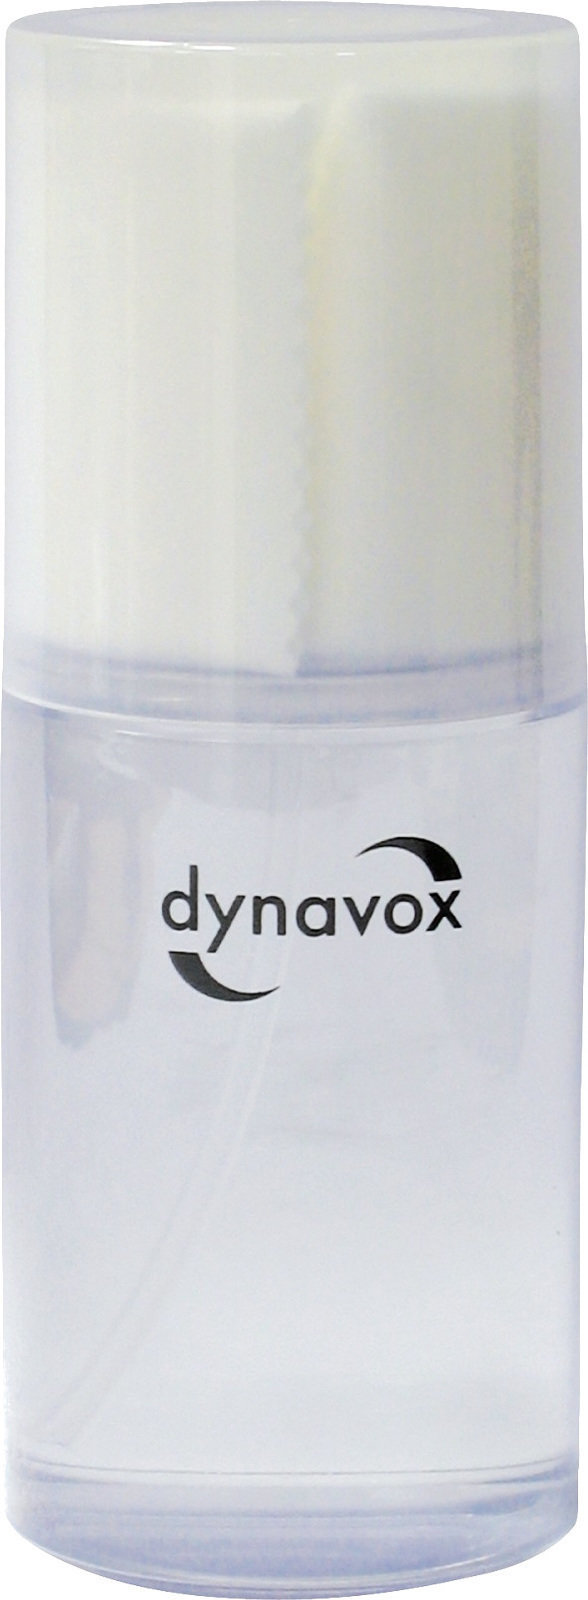 Cleaning agent for LP records Dynavox Cleaning Fluid